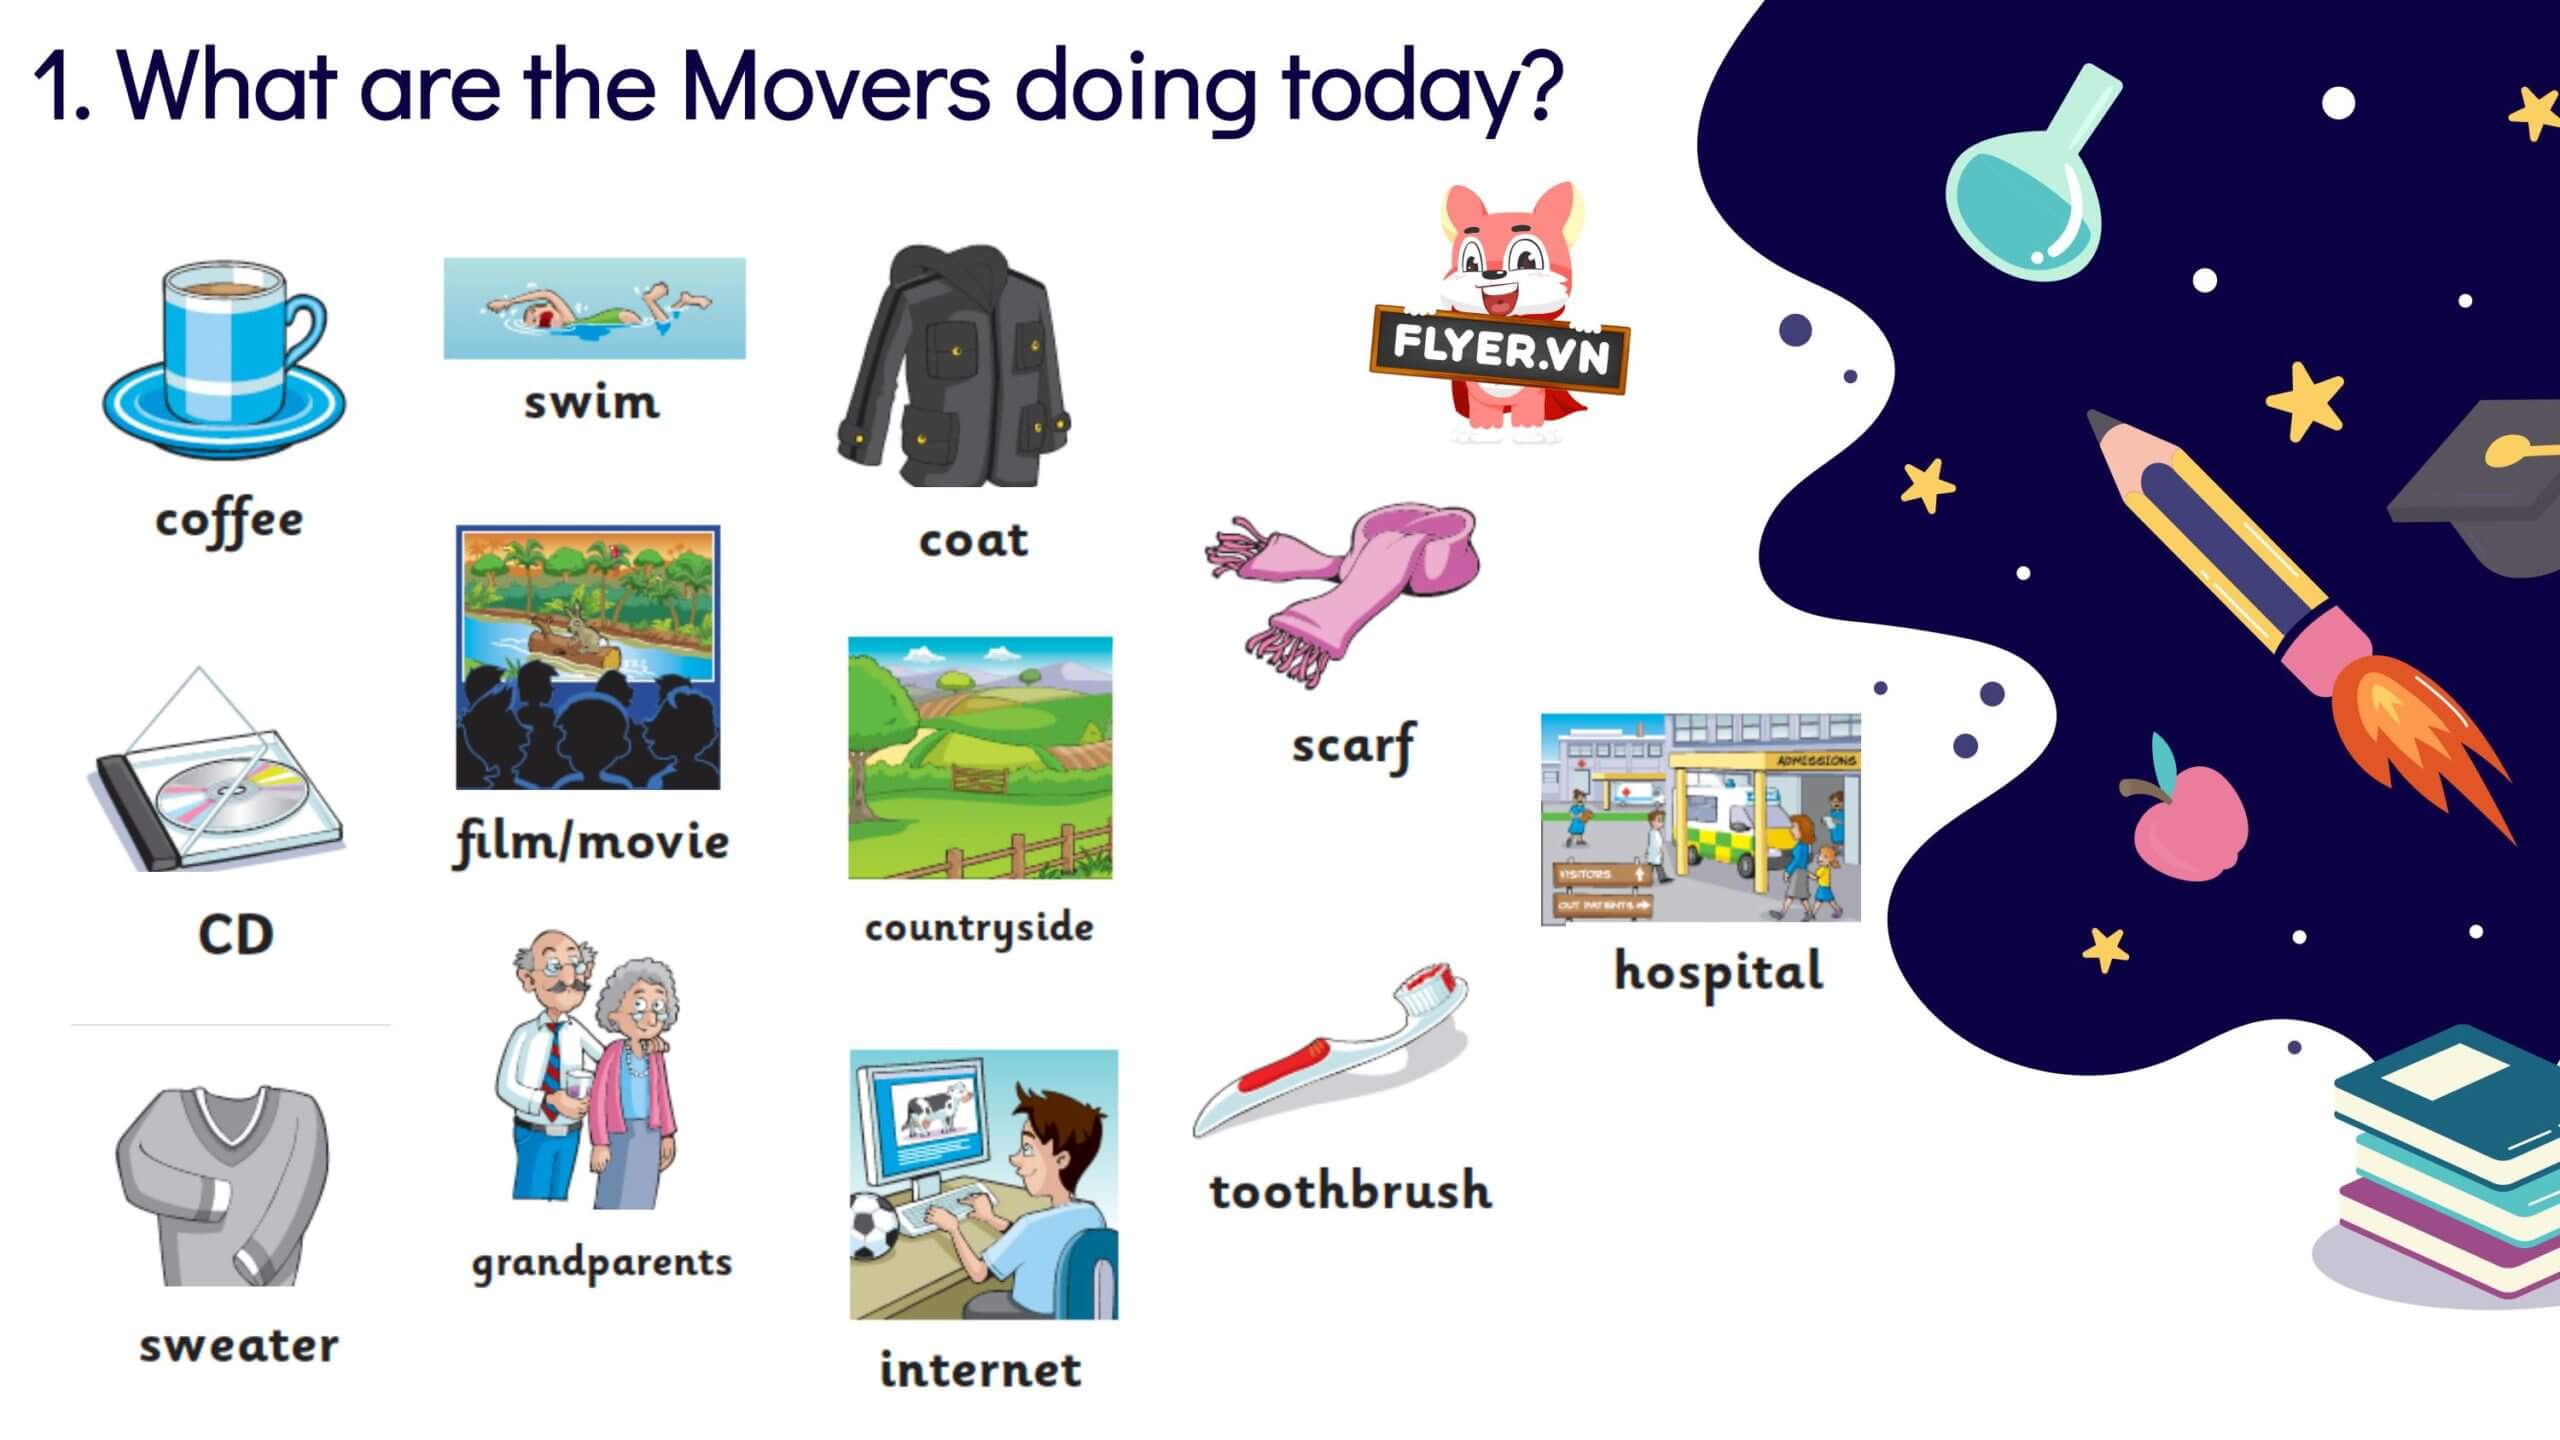 Từ vựng Movers Cambridge chủ đề "What are the Movers doing today?"